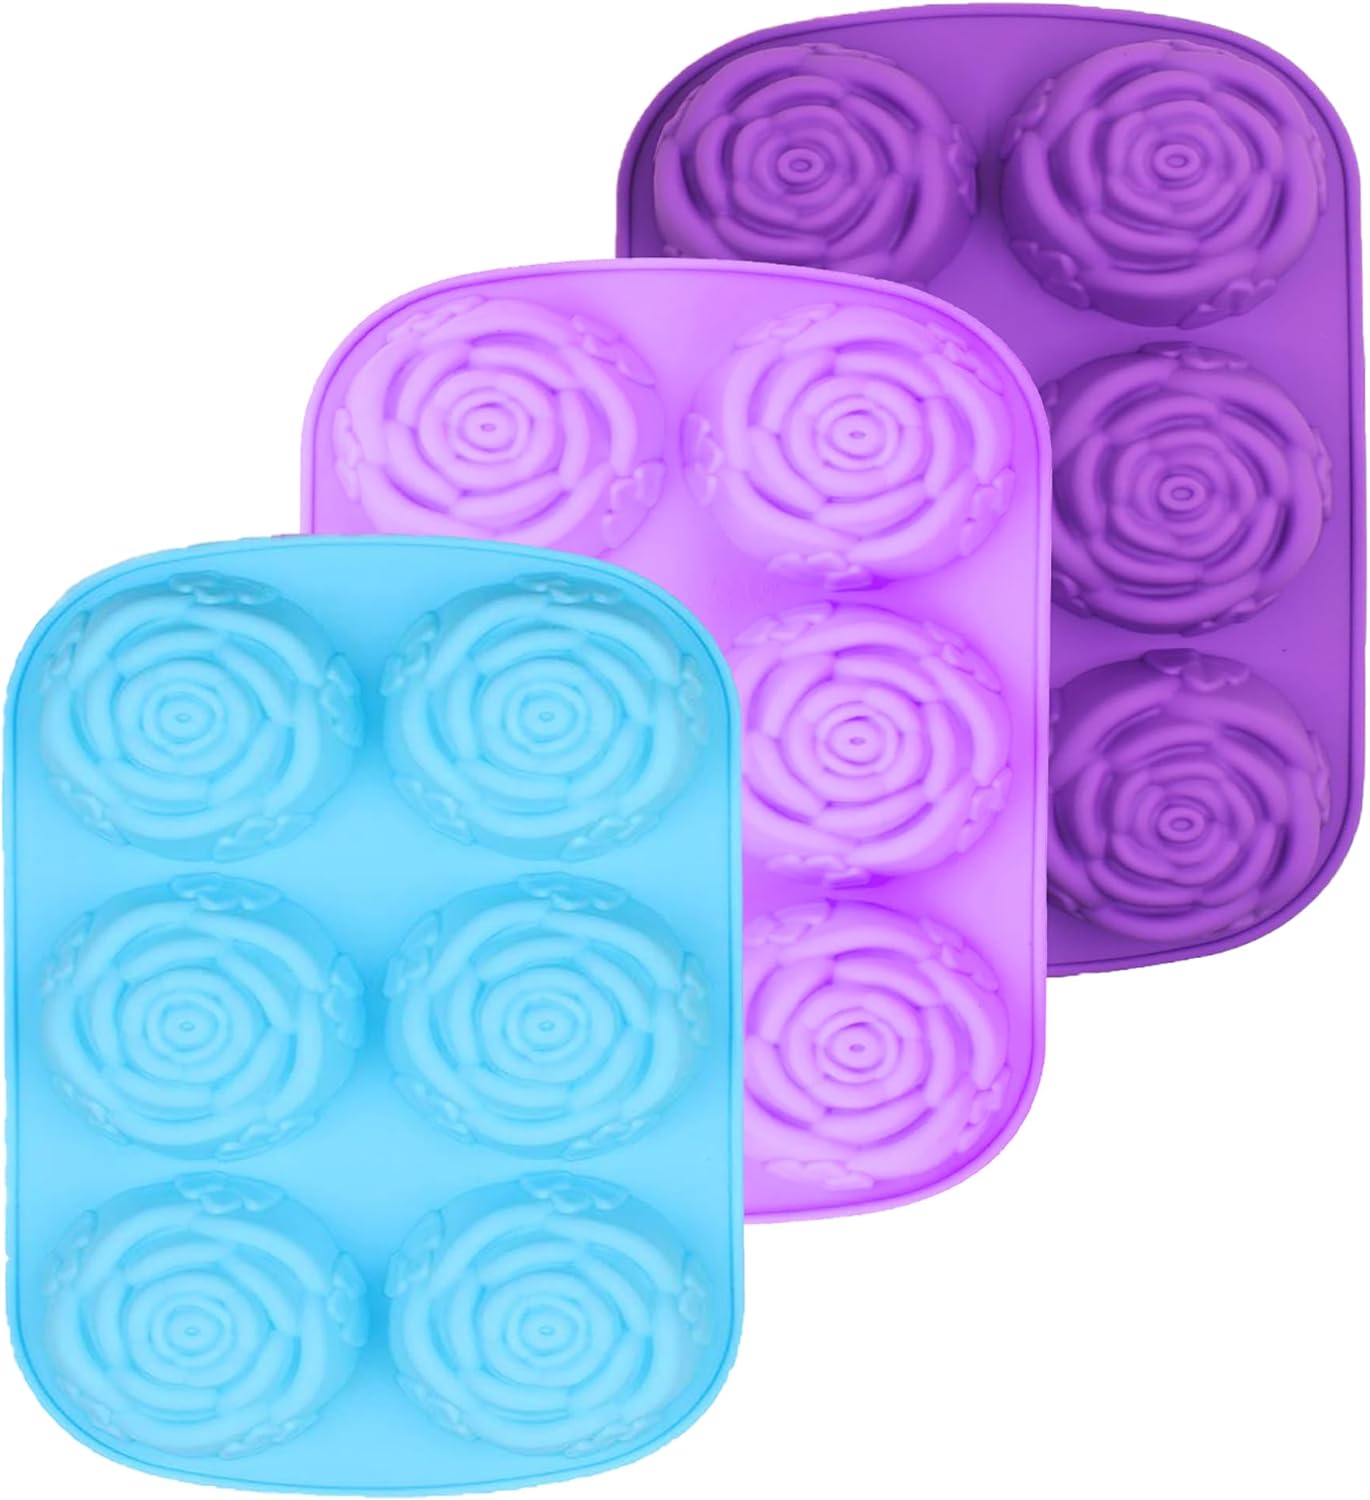 Reusable Rose Flower Silicone Mold for Cake 3 pcs